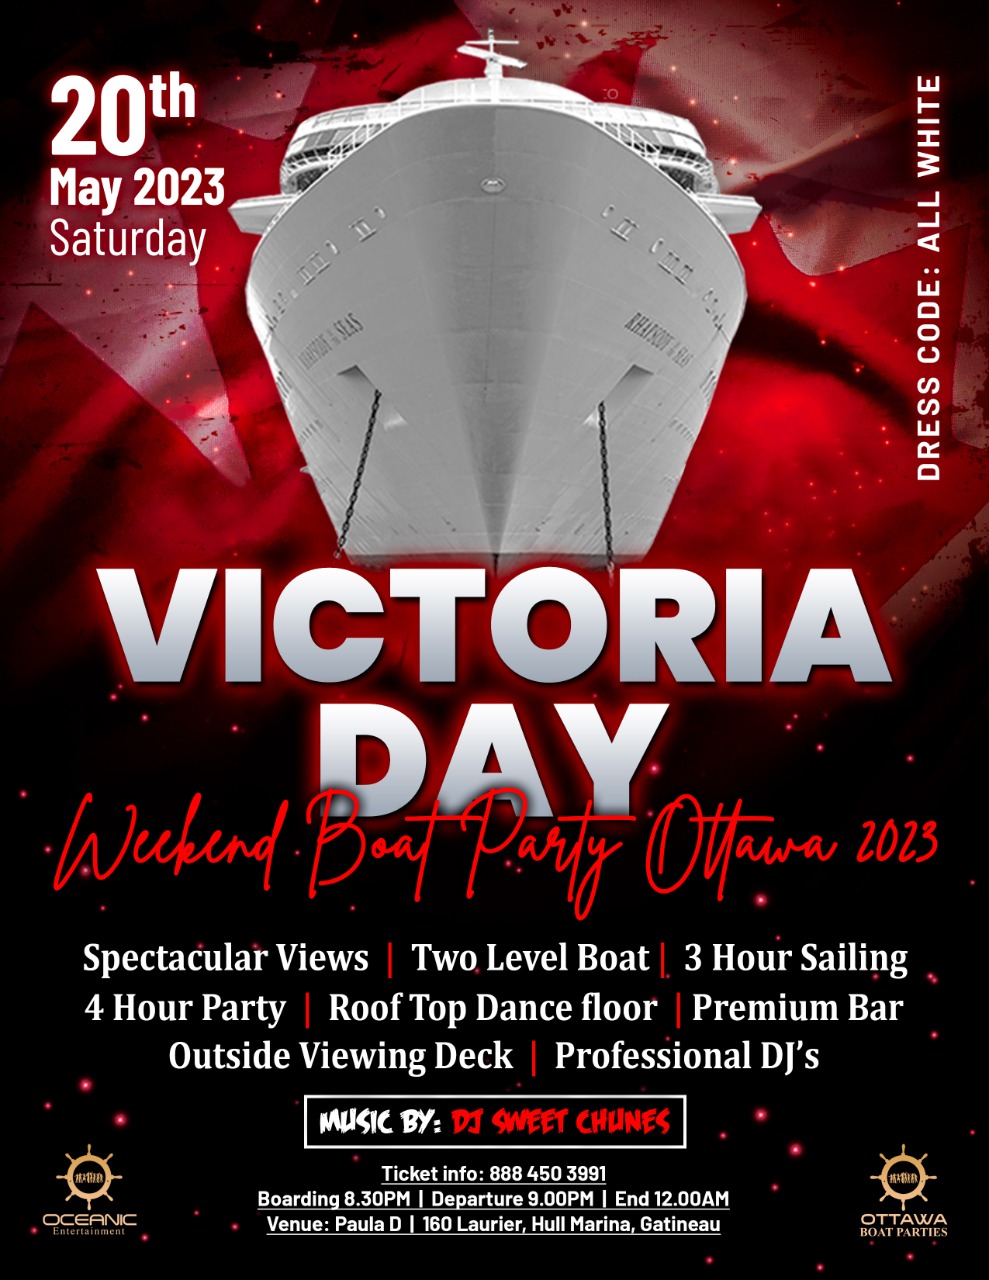 VICTORIA DAY WEEKEND BOAT PARTY OTTAWA 2023 | TICKETS STARTING AT $25